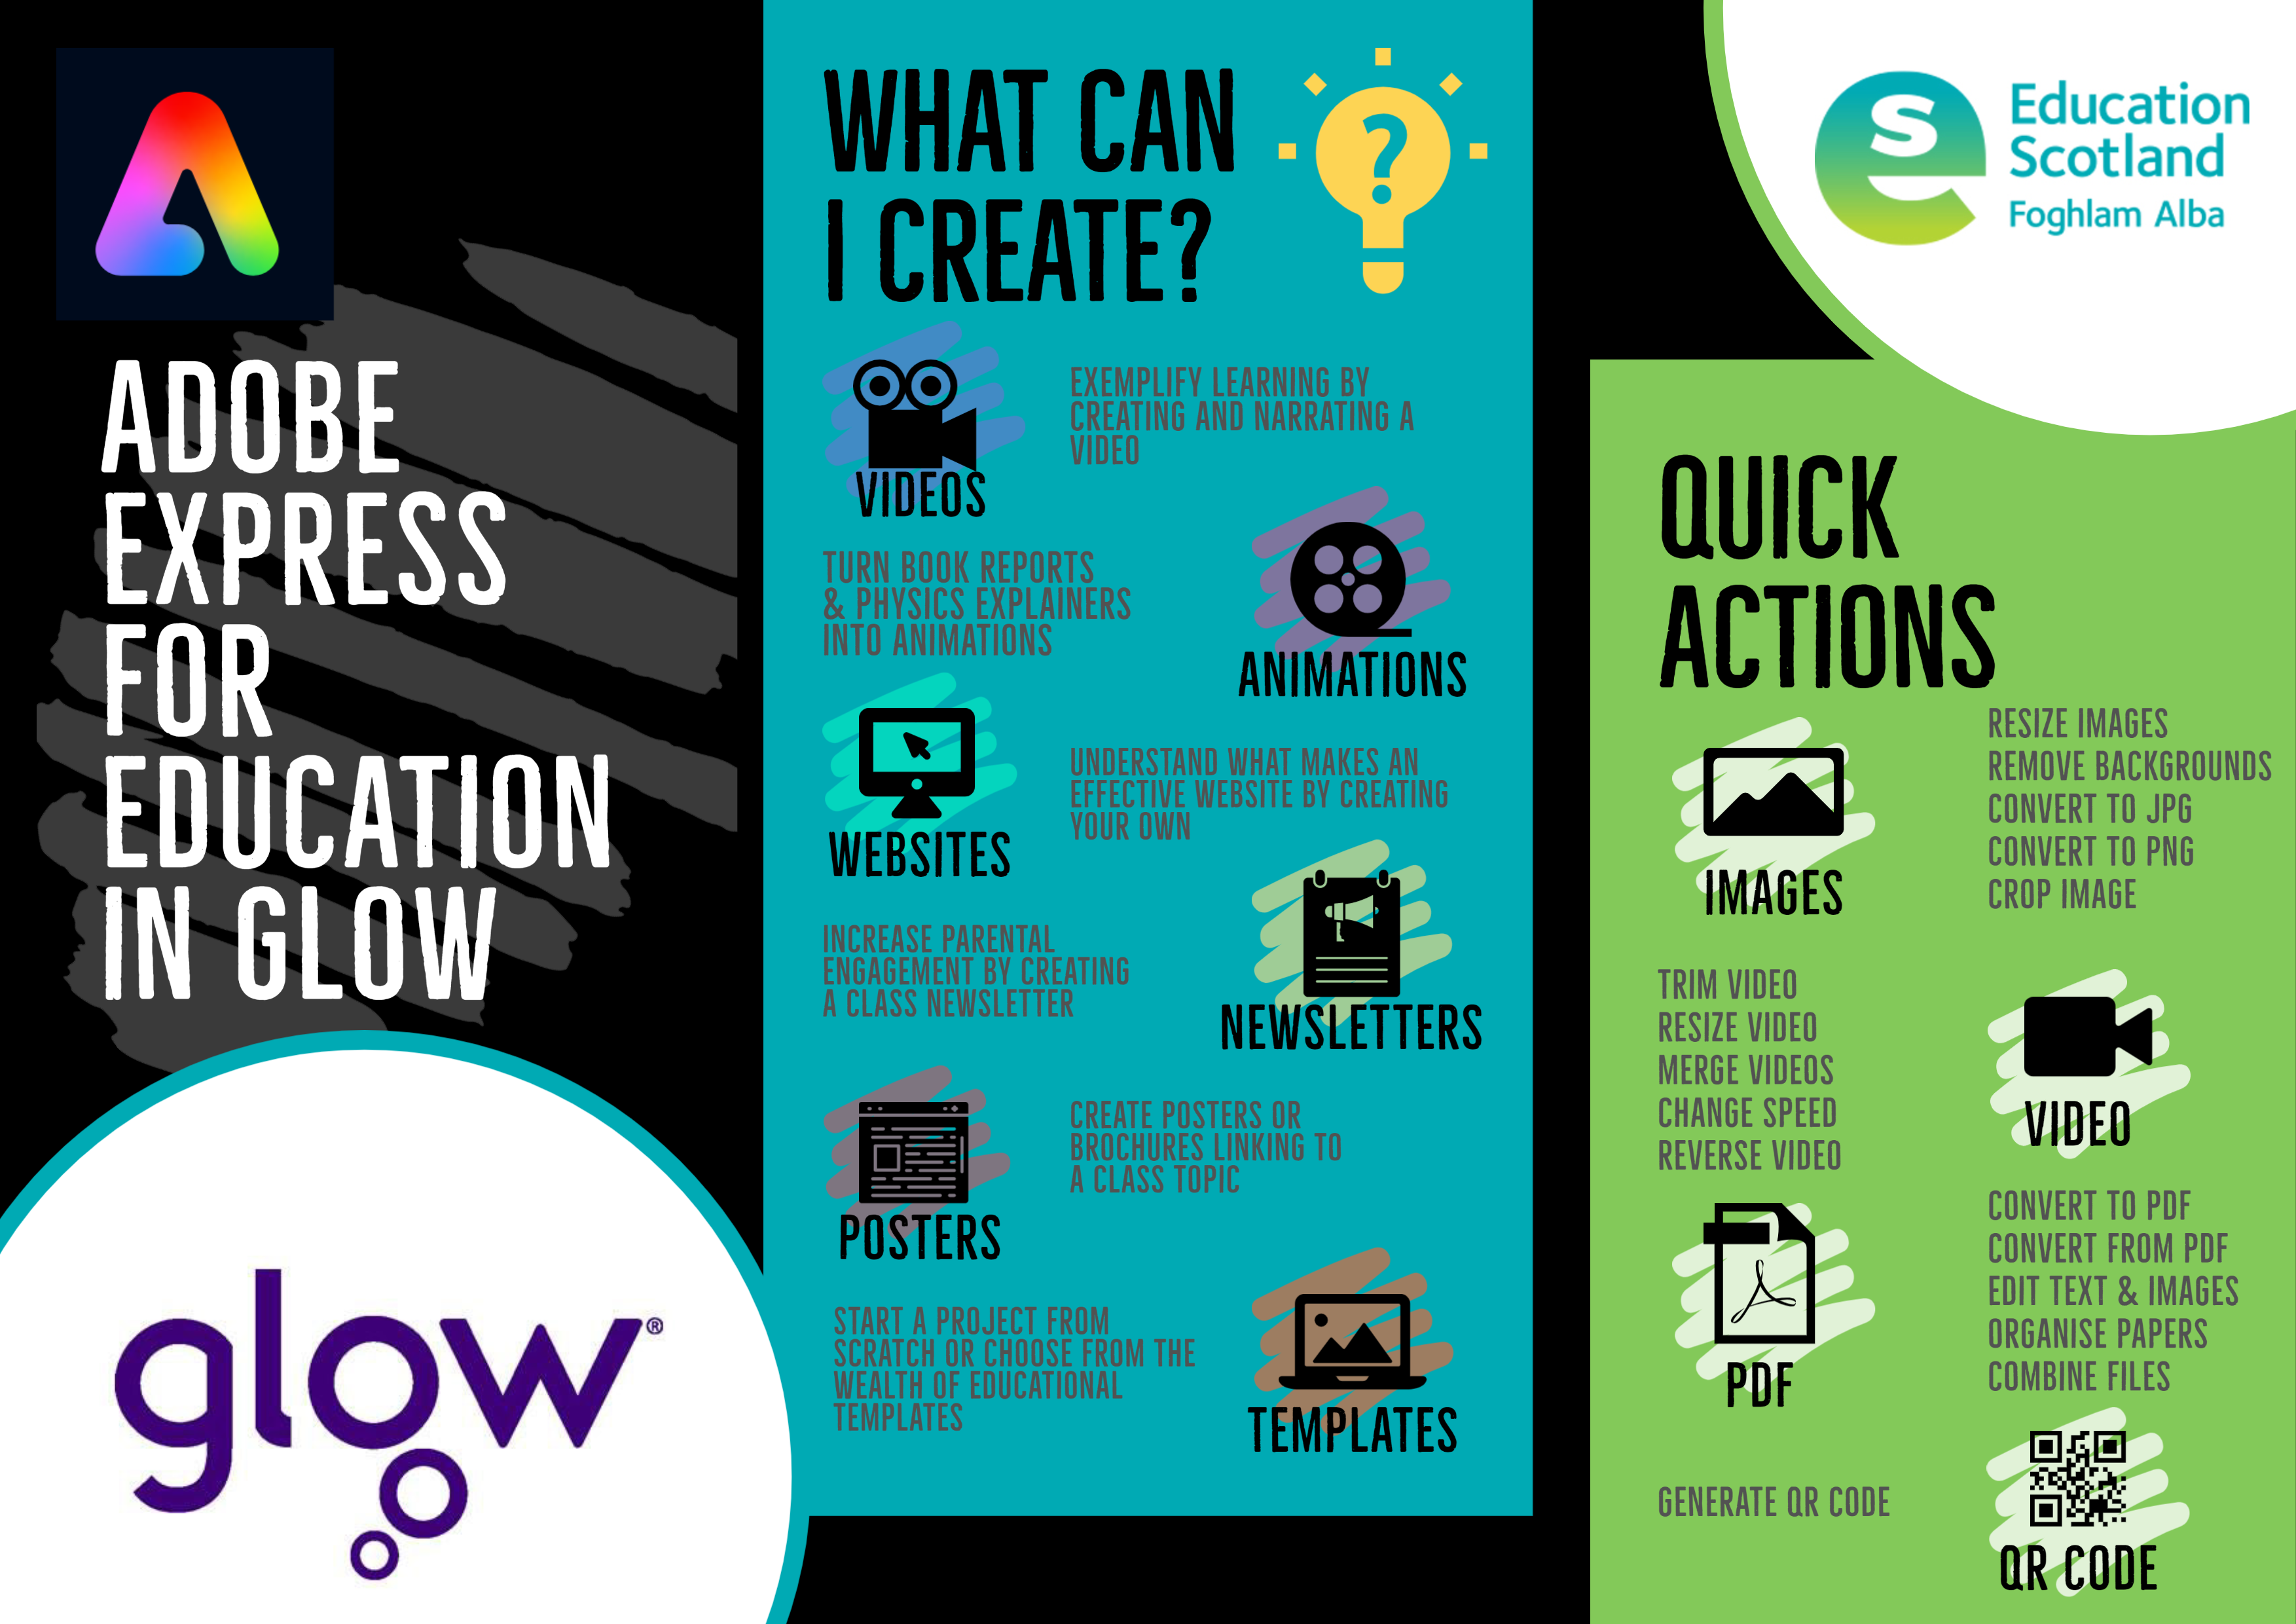 Adobe Express for Education in Glow infographic with a list of items that users can create and a list of quick actions.